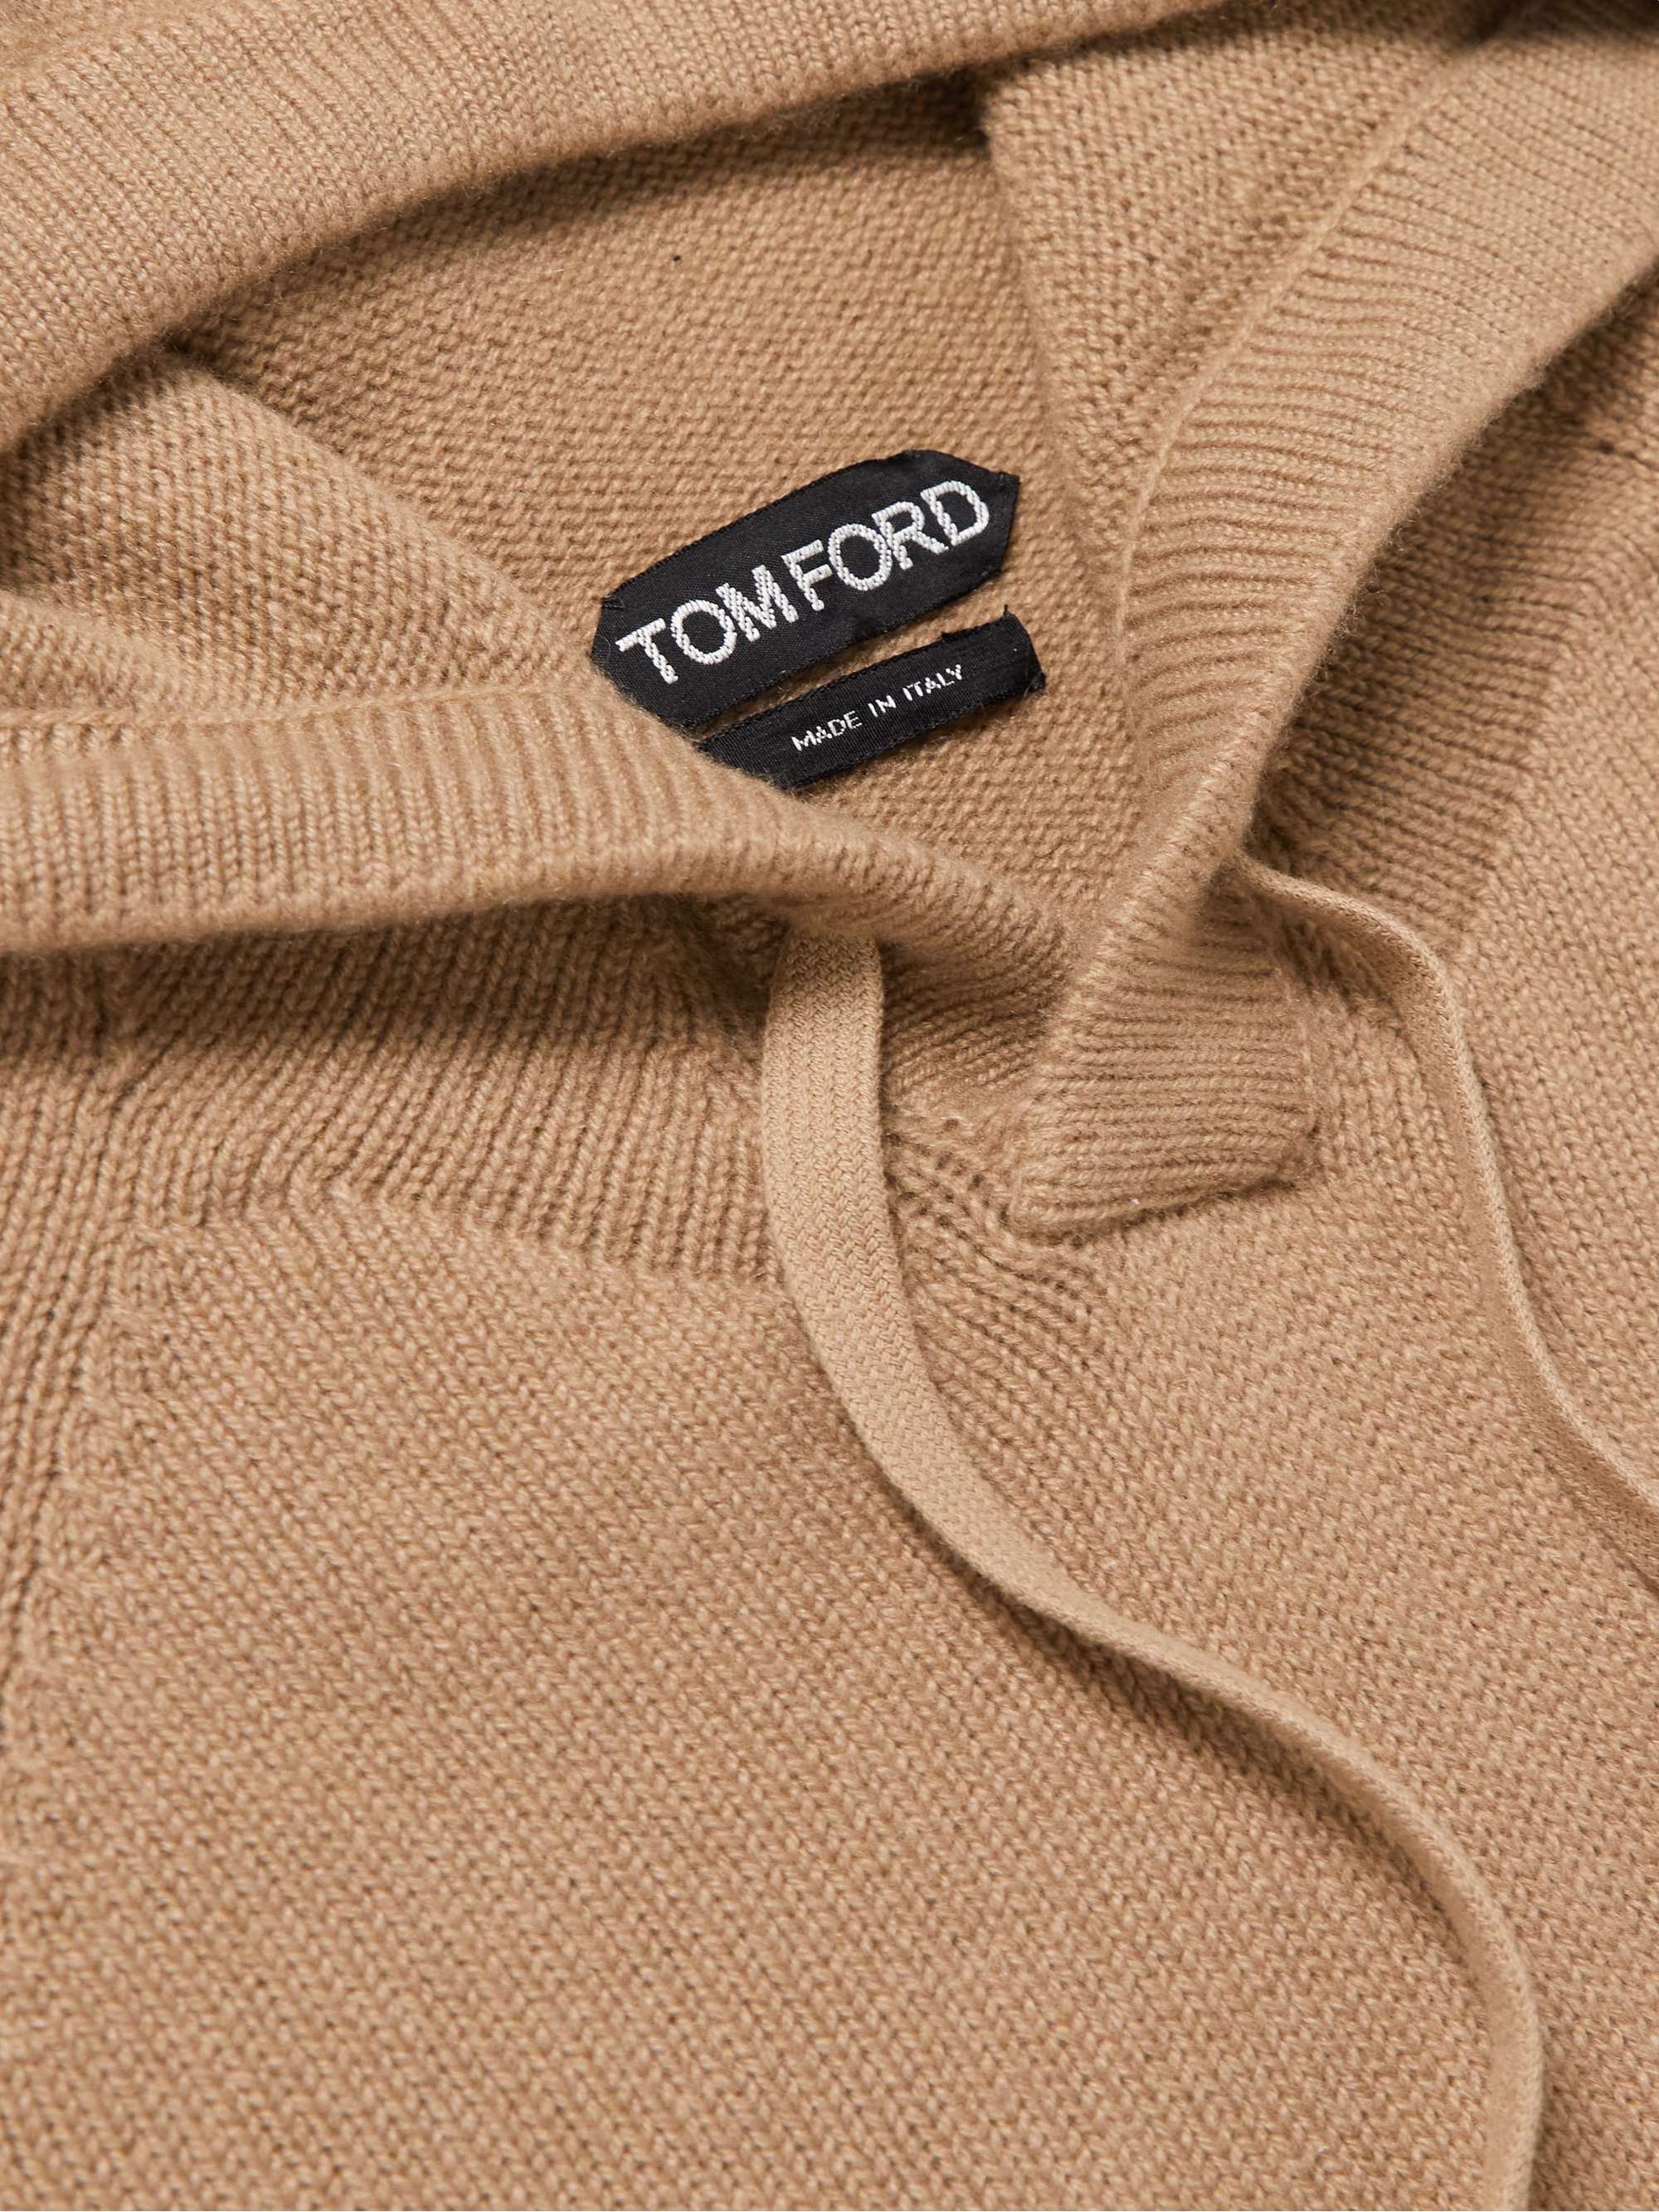 TOM FORD Cashmere Hoodie